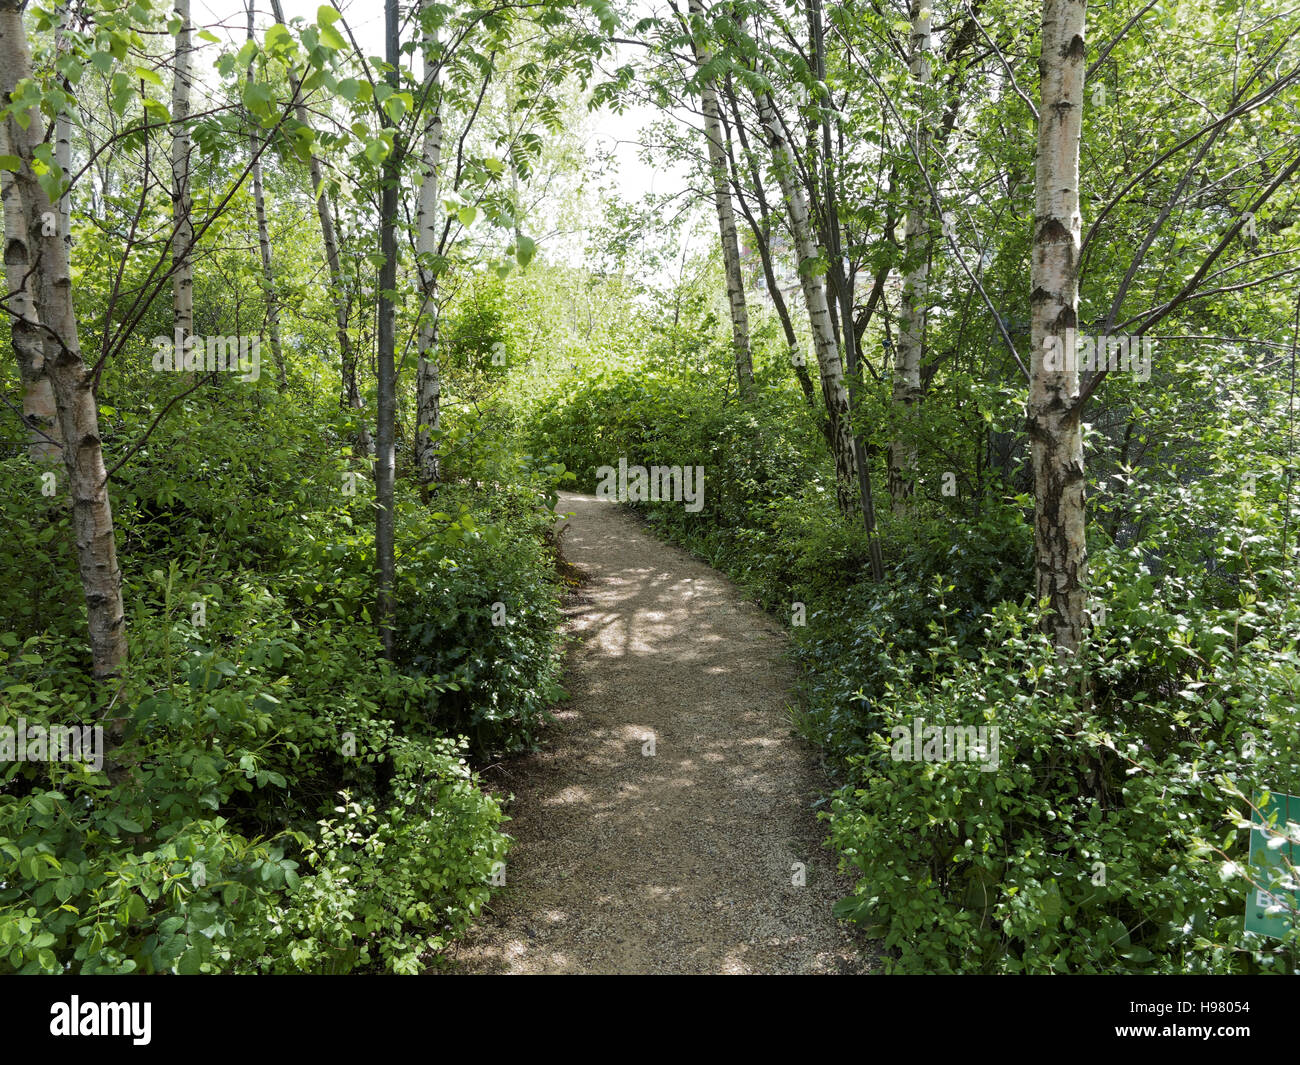 woodland scene greenery summer with path and green leafed trees Stock Photo